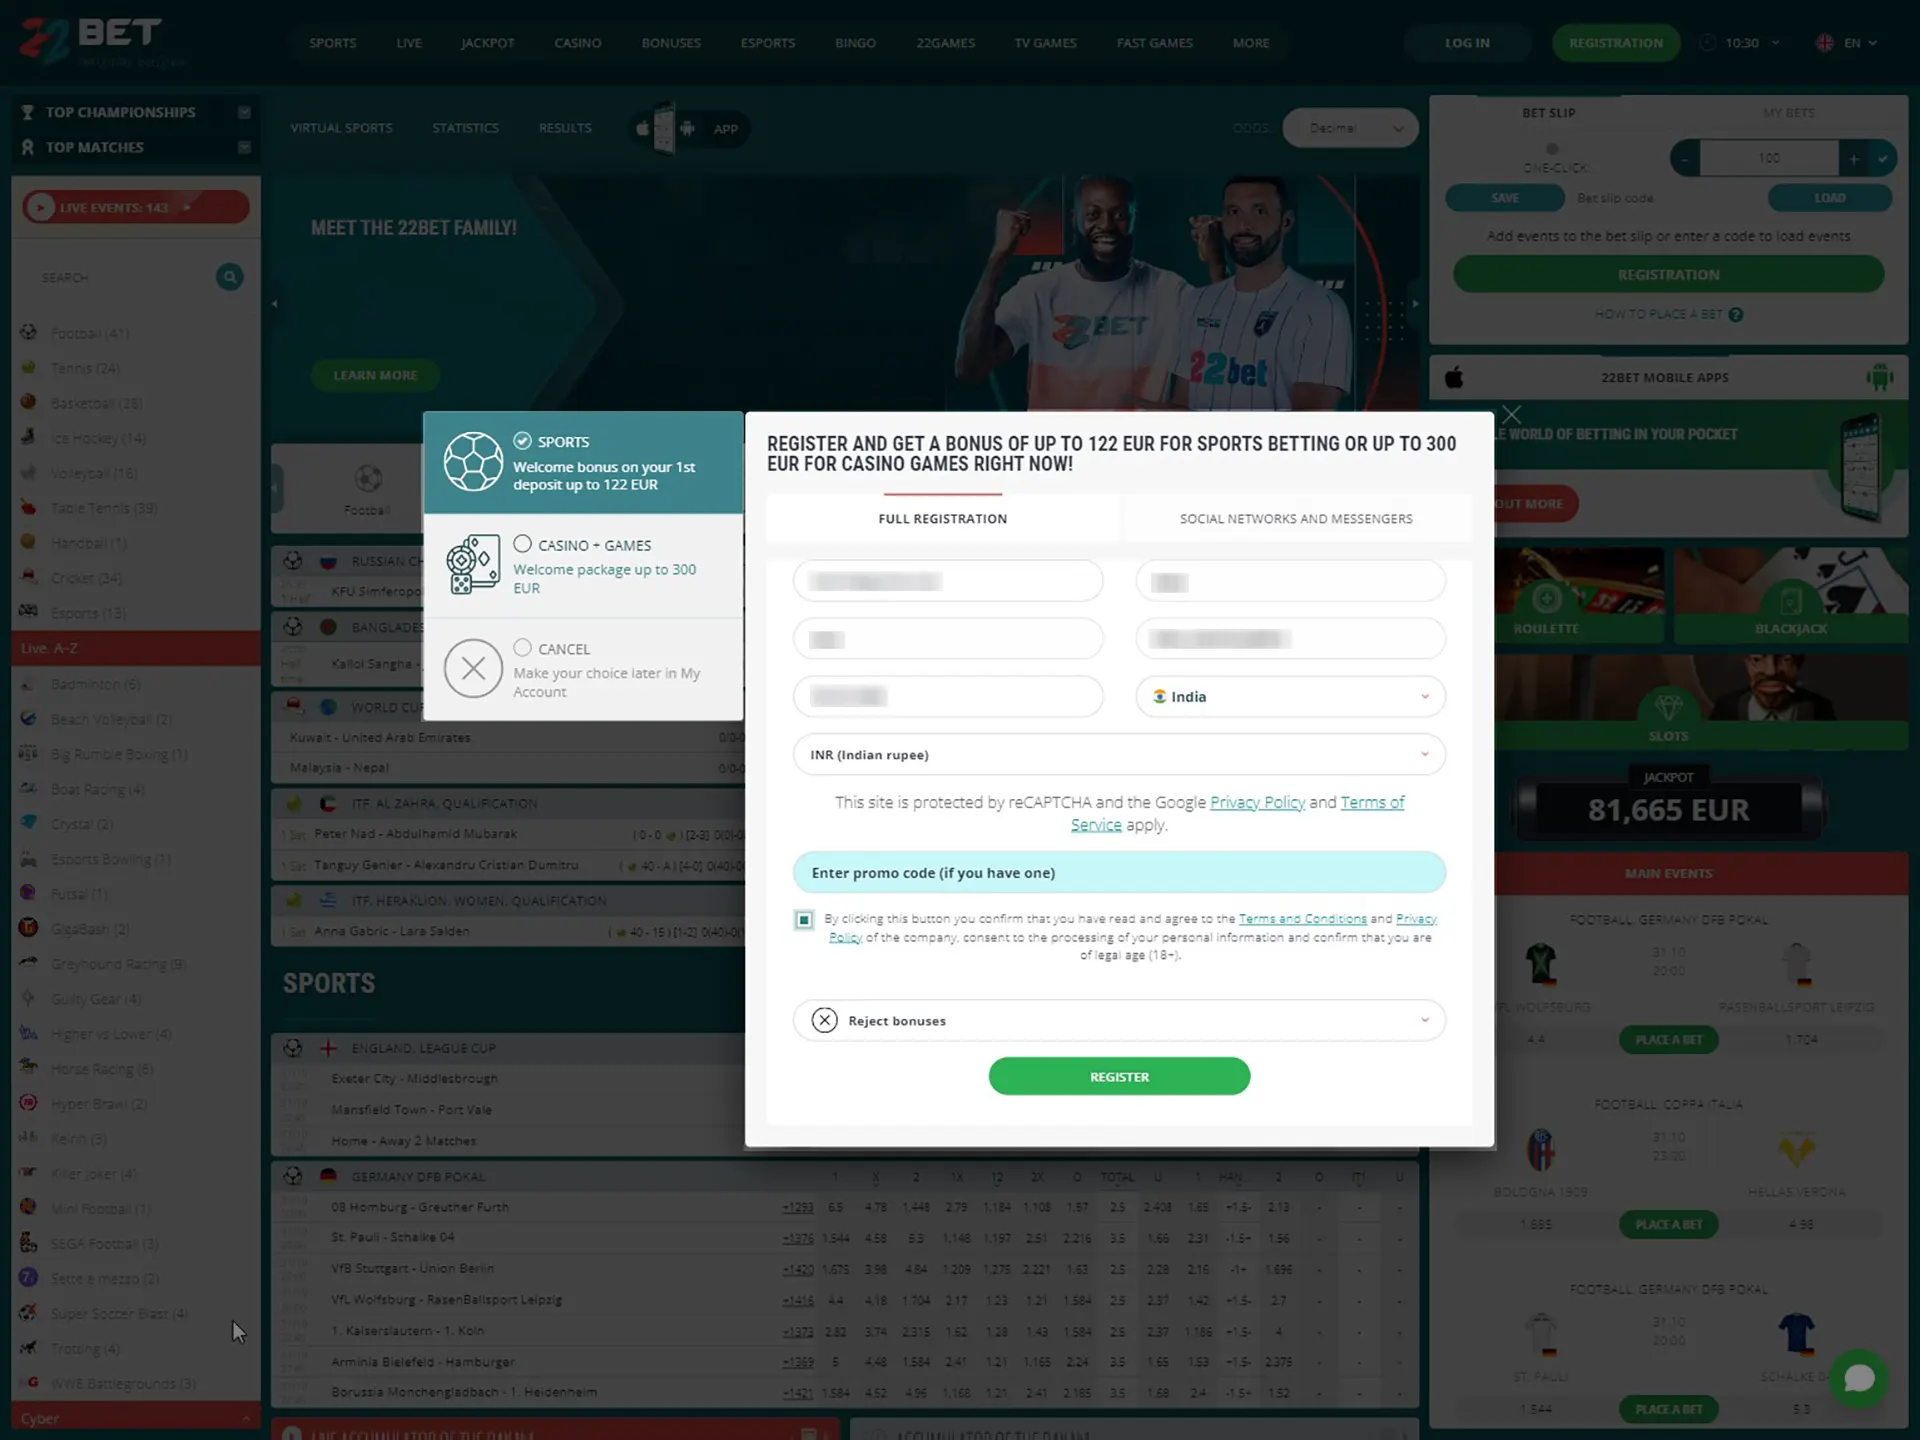 How to register in 22bet